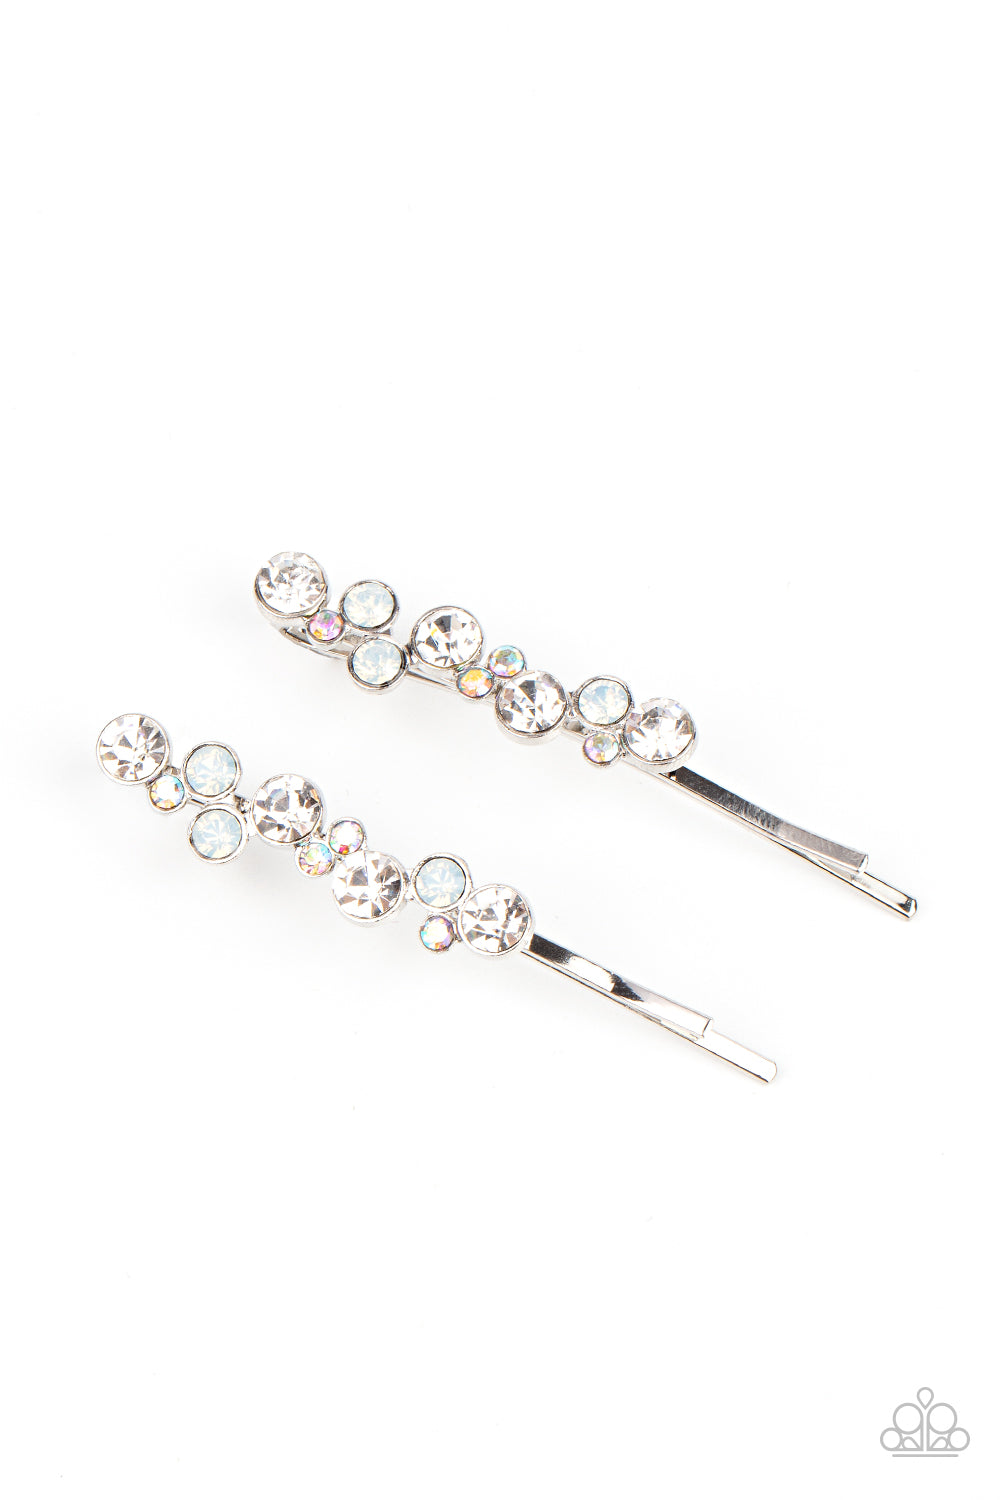 Paparazzi Accessories - Bubbly Ballroom #HB58 - White Hair Accessories